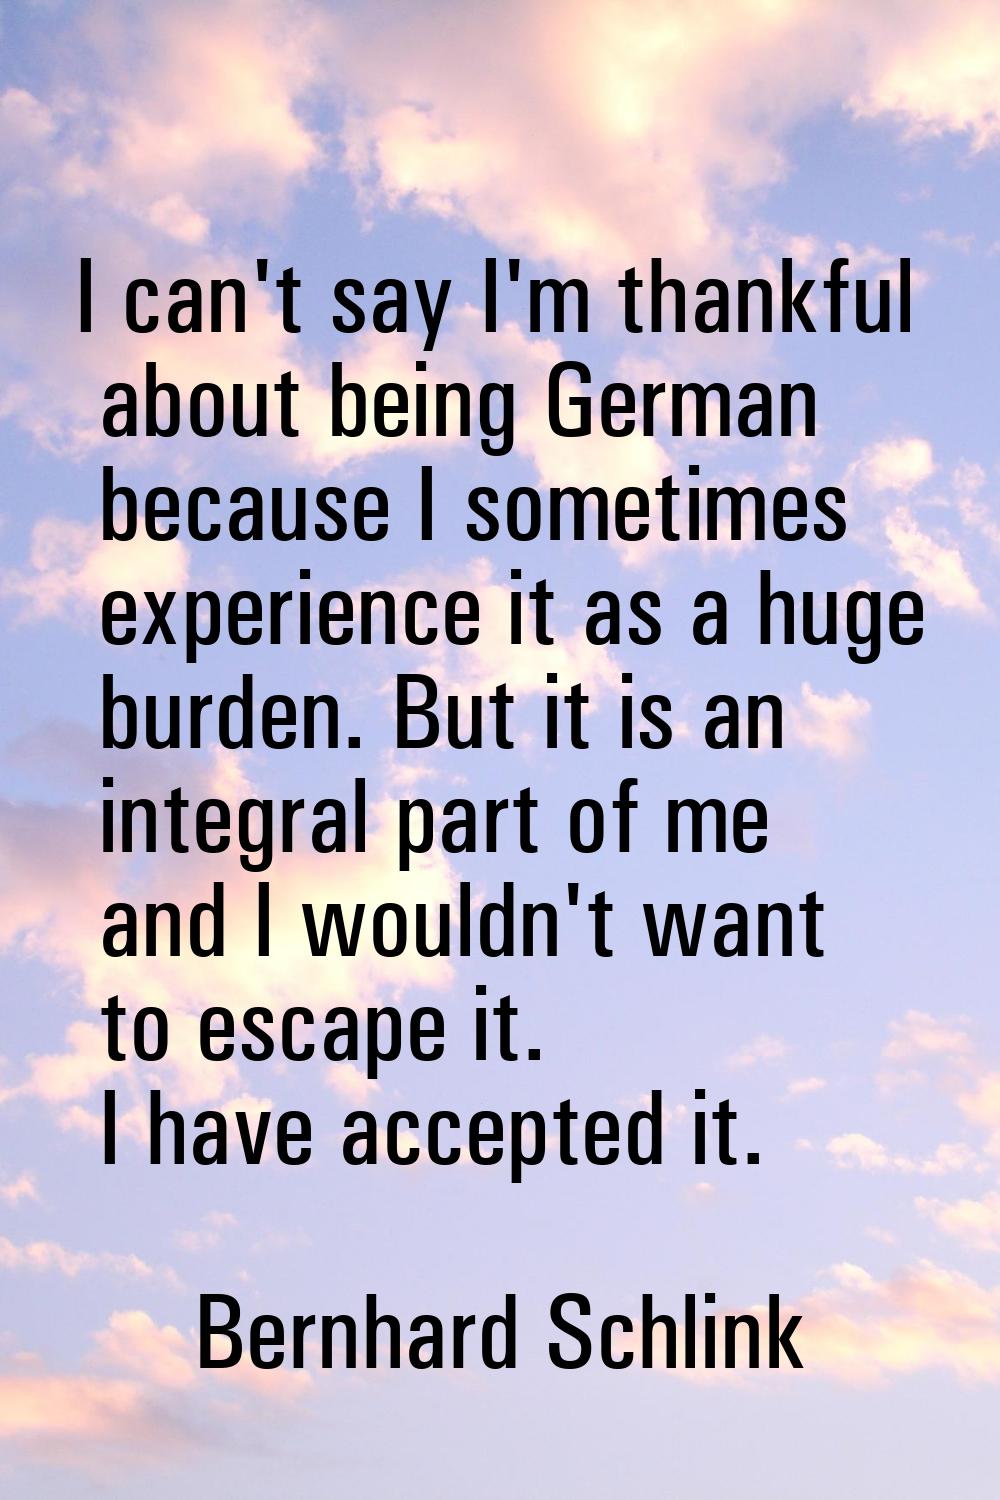 I can't say I'm thankful about being German because I sometimes experience it as a huge burden. But